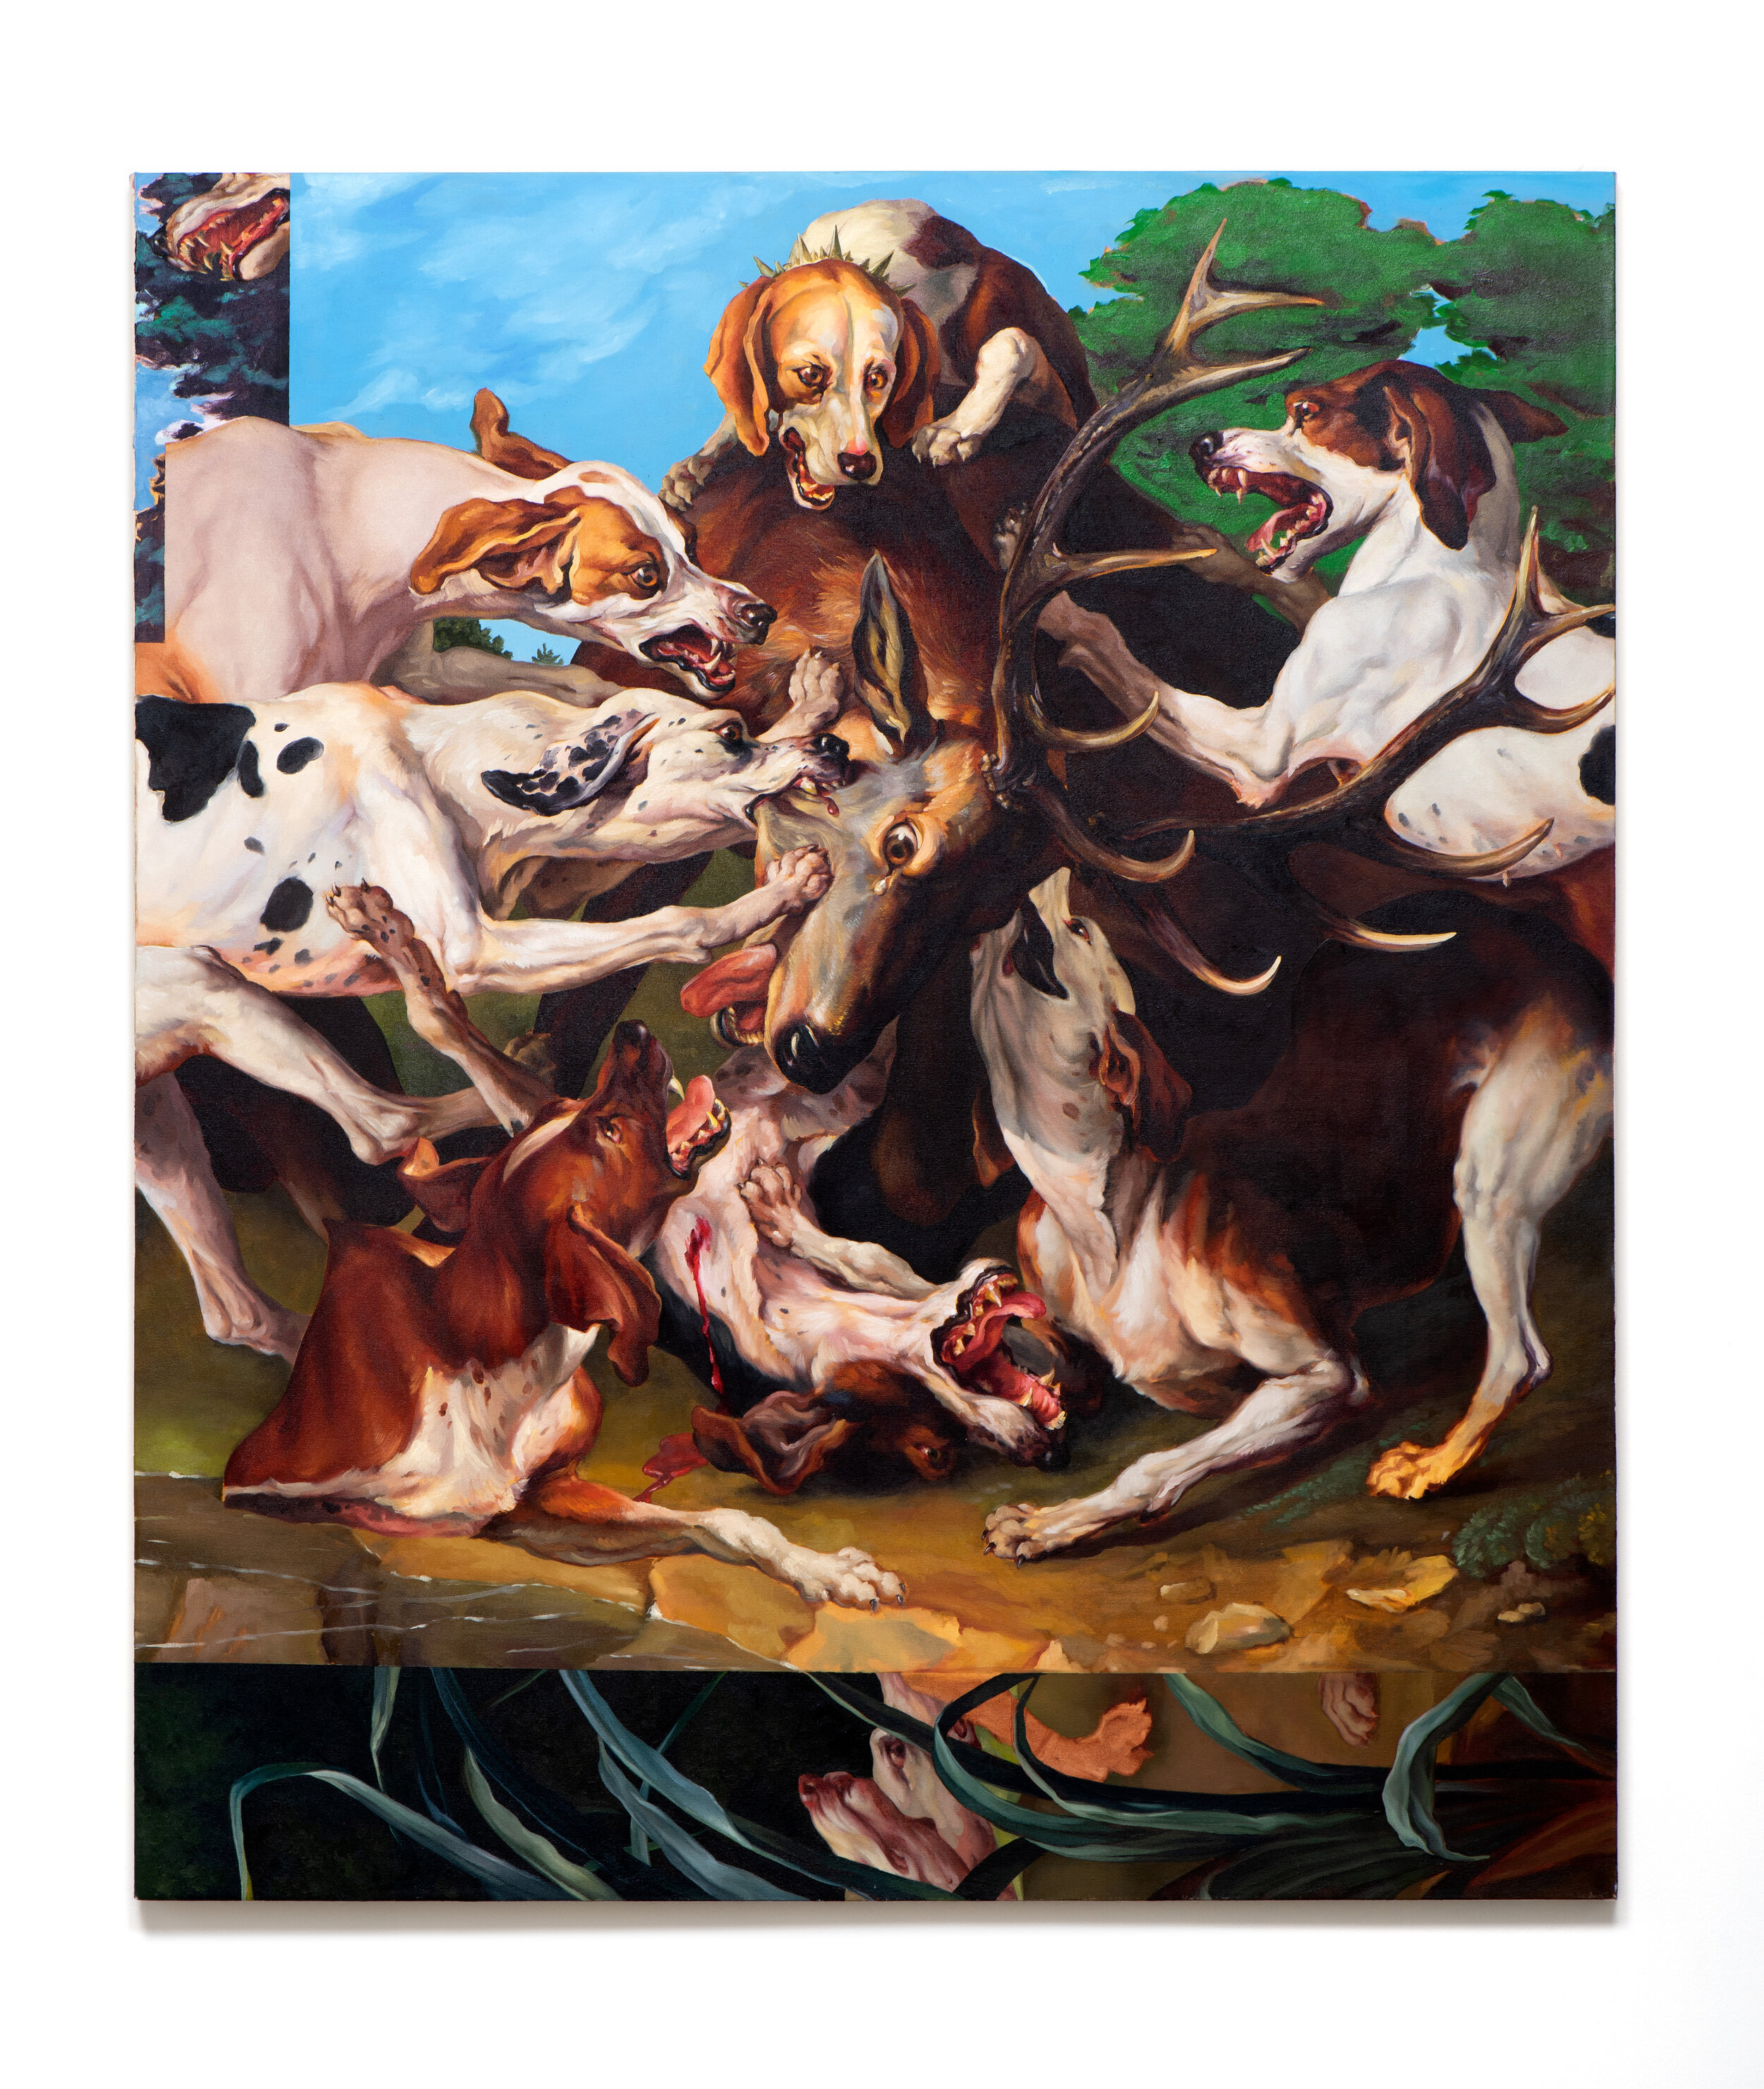   Stag Hunt Painting (Desportes) , 2019 Oil on canvas 56 x 48 inches 